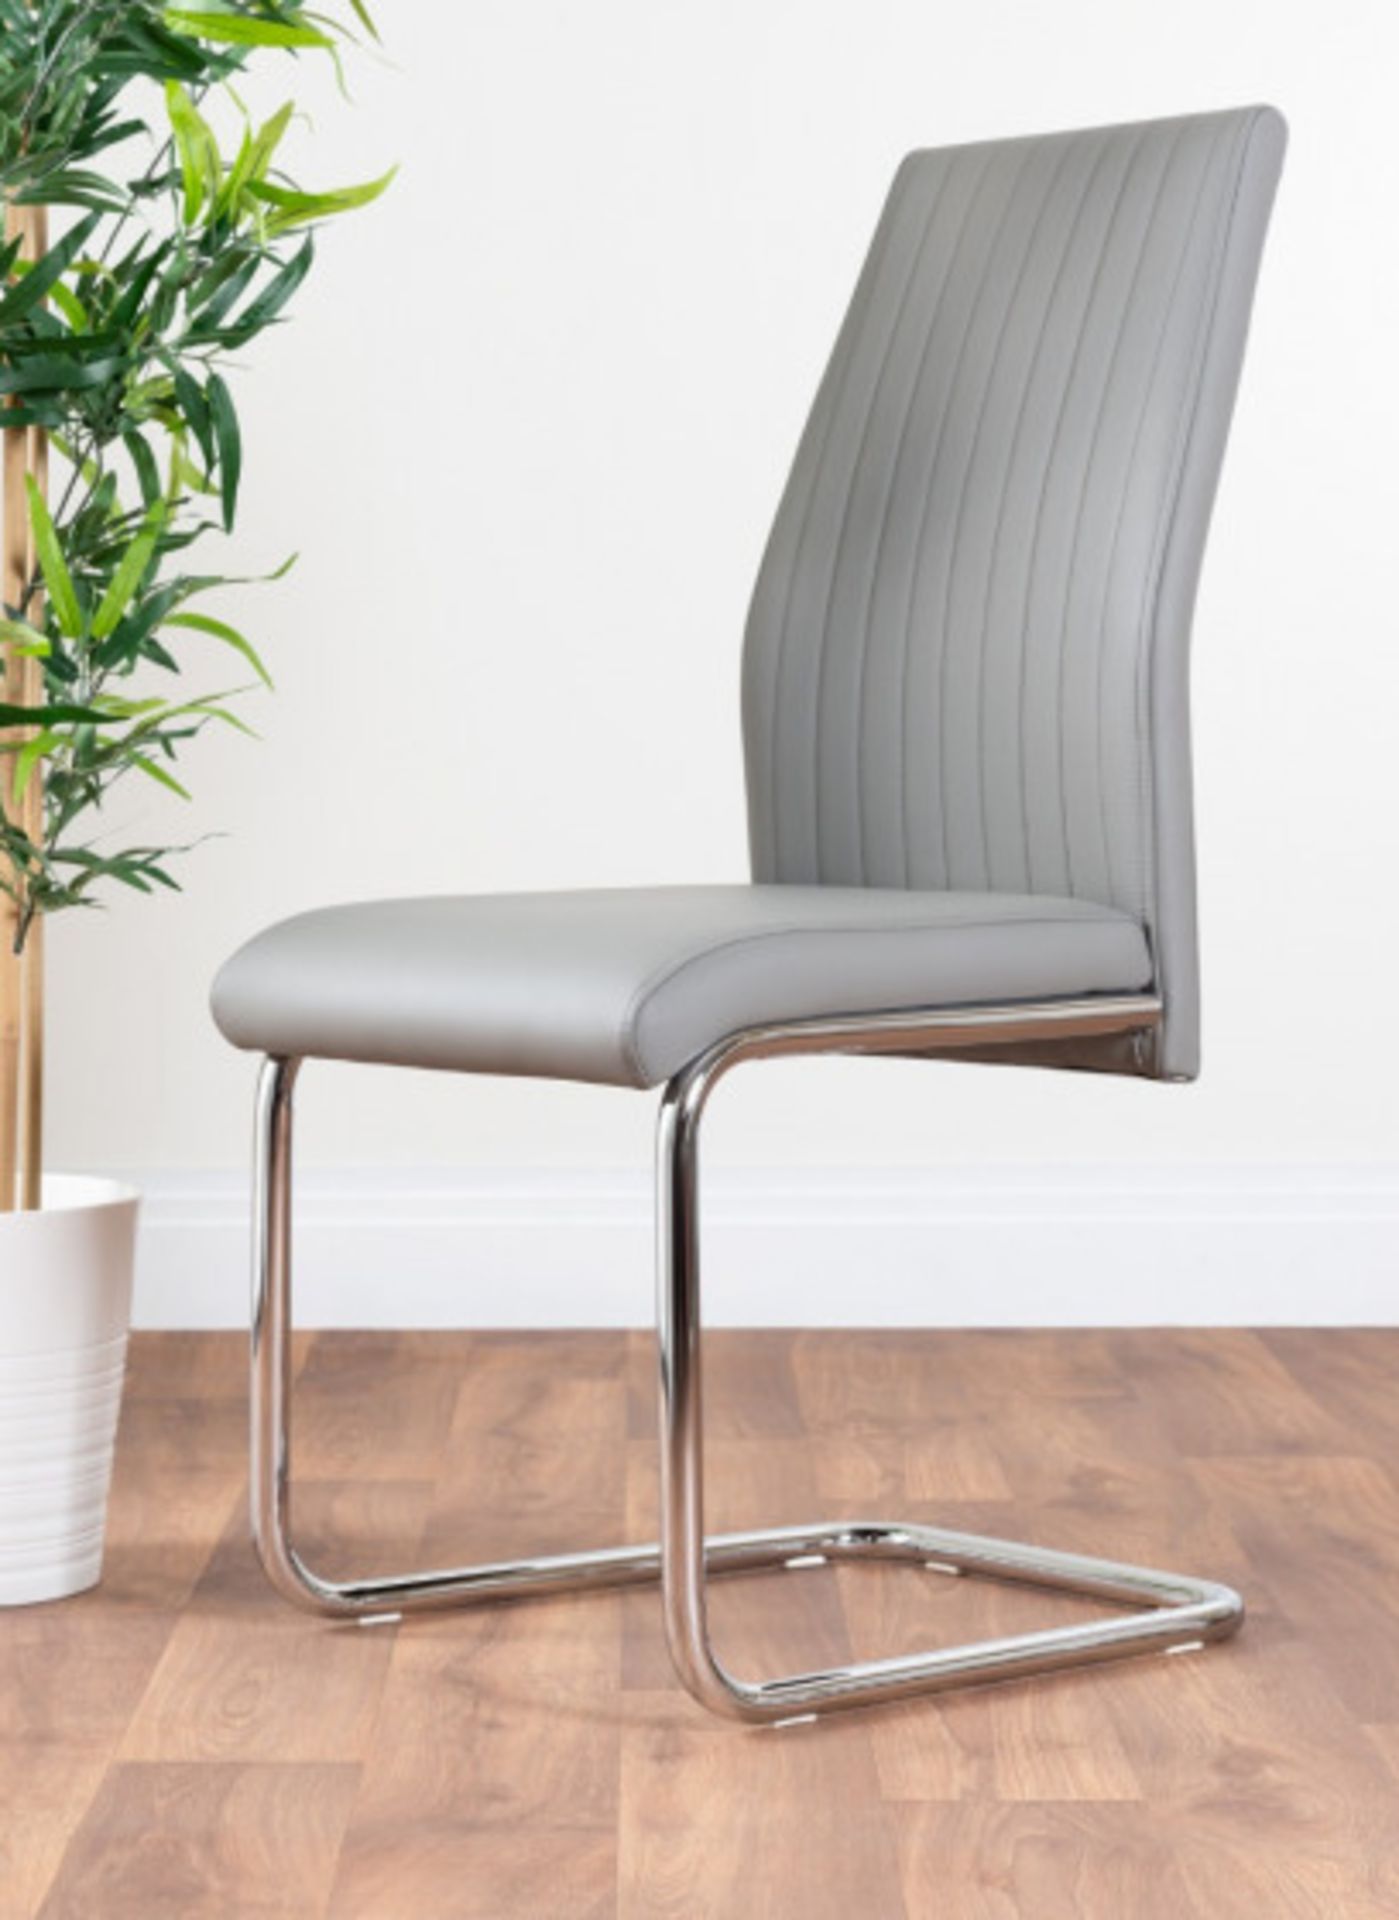 2x Lorenzo Modern Elephant Grey Faux Leather Chrome Dining Chairs - RRP £119.99.